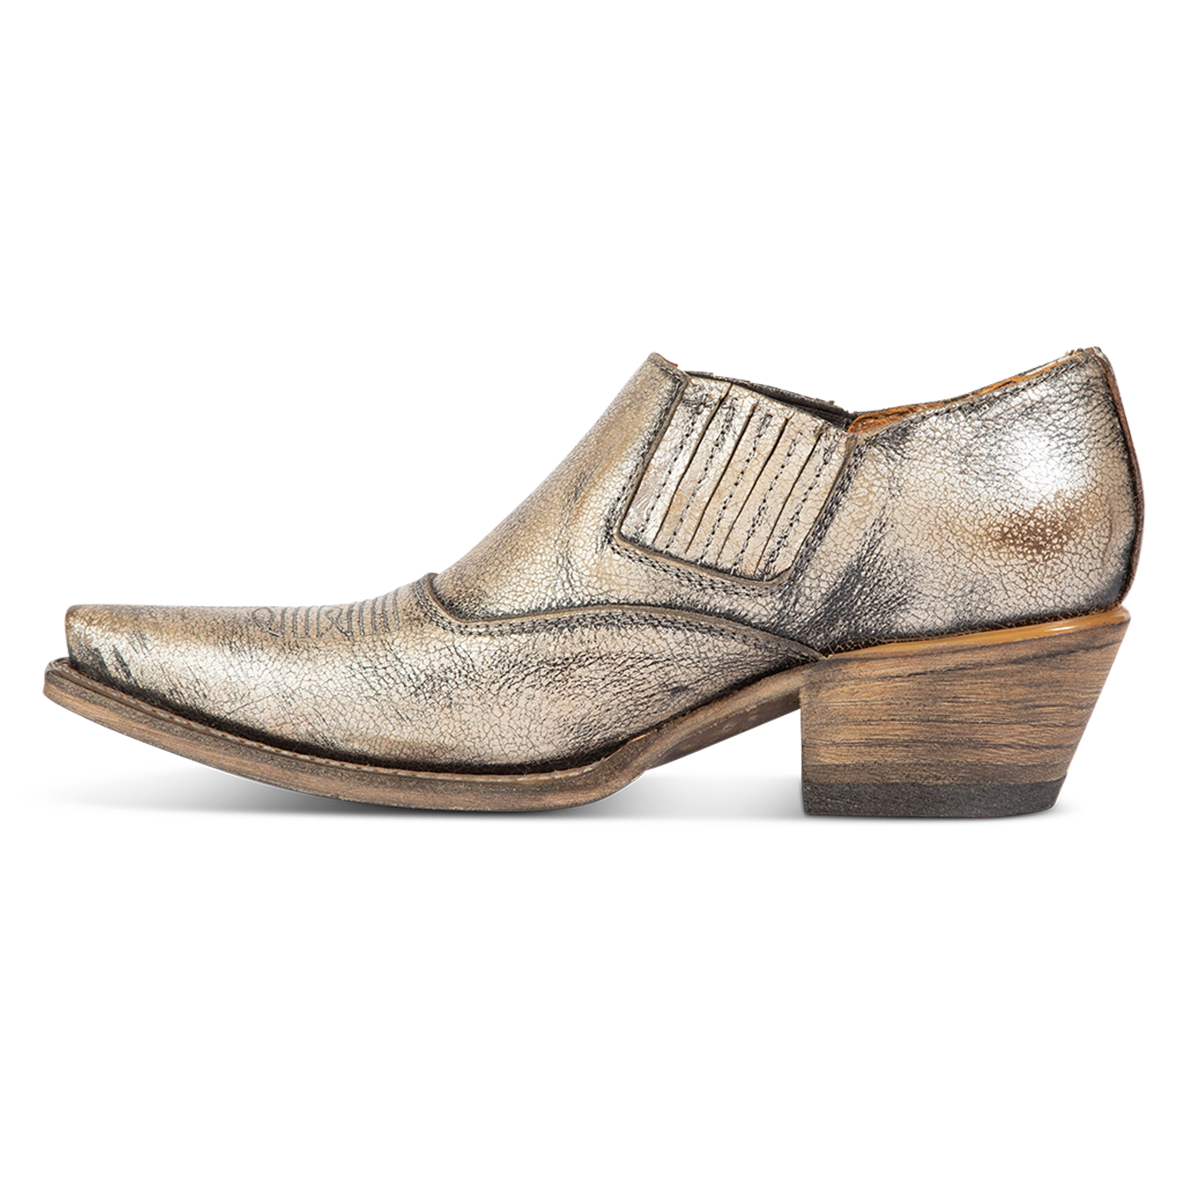 Inside view showing gore and western stitching on FREEBIRD women's Wyoming beige western shoe